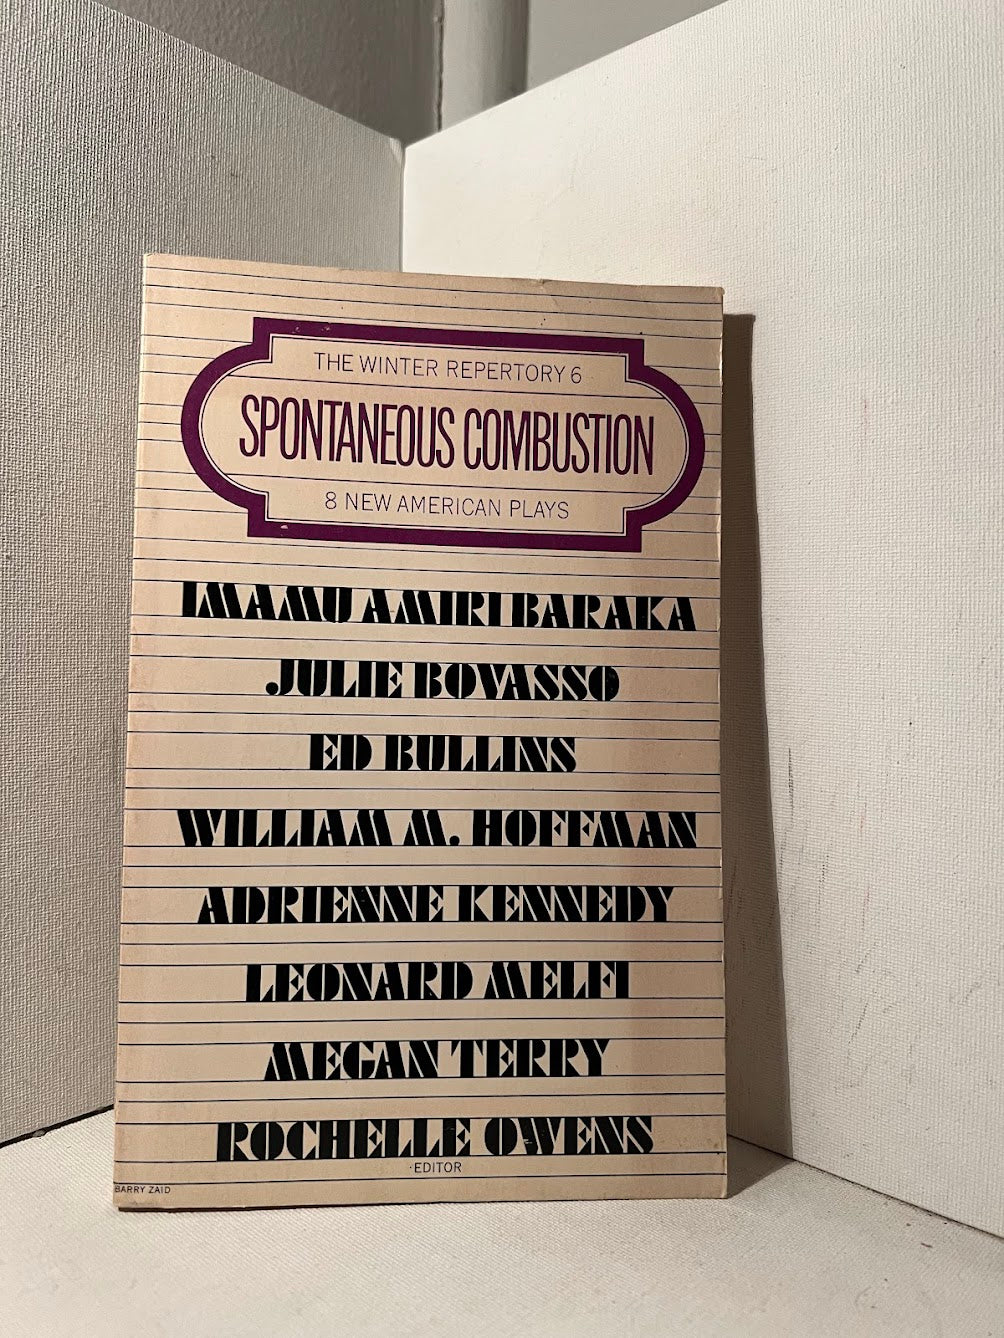 Spontaneous Combustion (8 New American Plays)